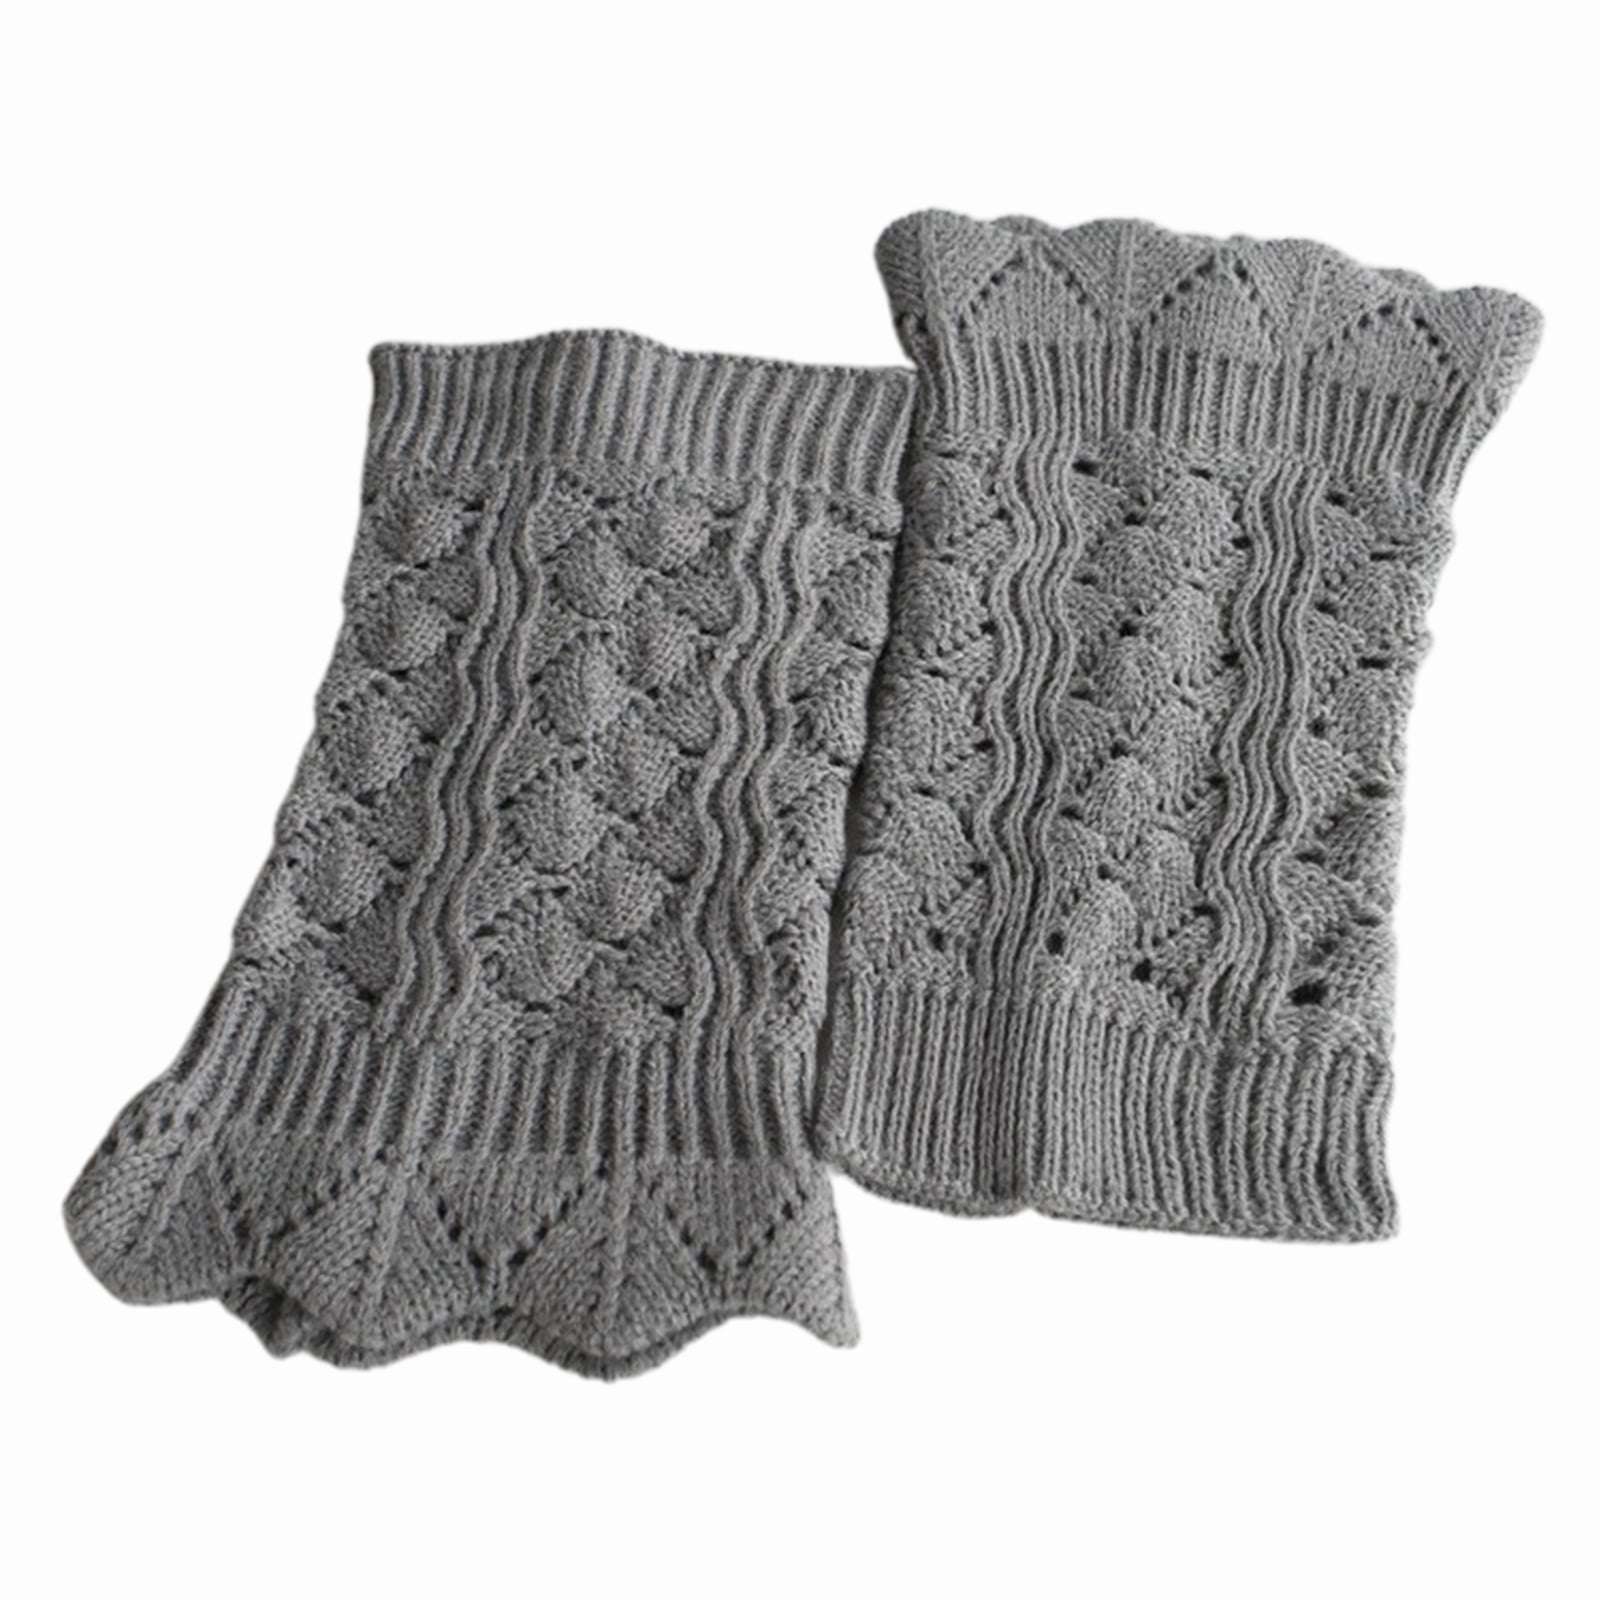 Kize Jacquard Knitted Cuffs Toppers Liner Boot Leg Warmers Socks 